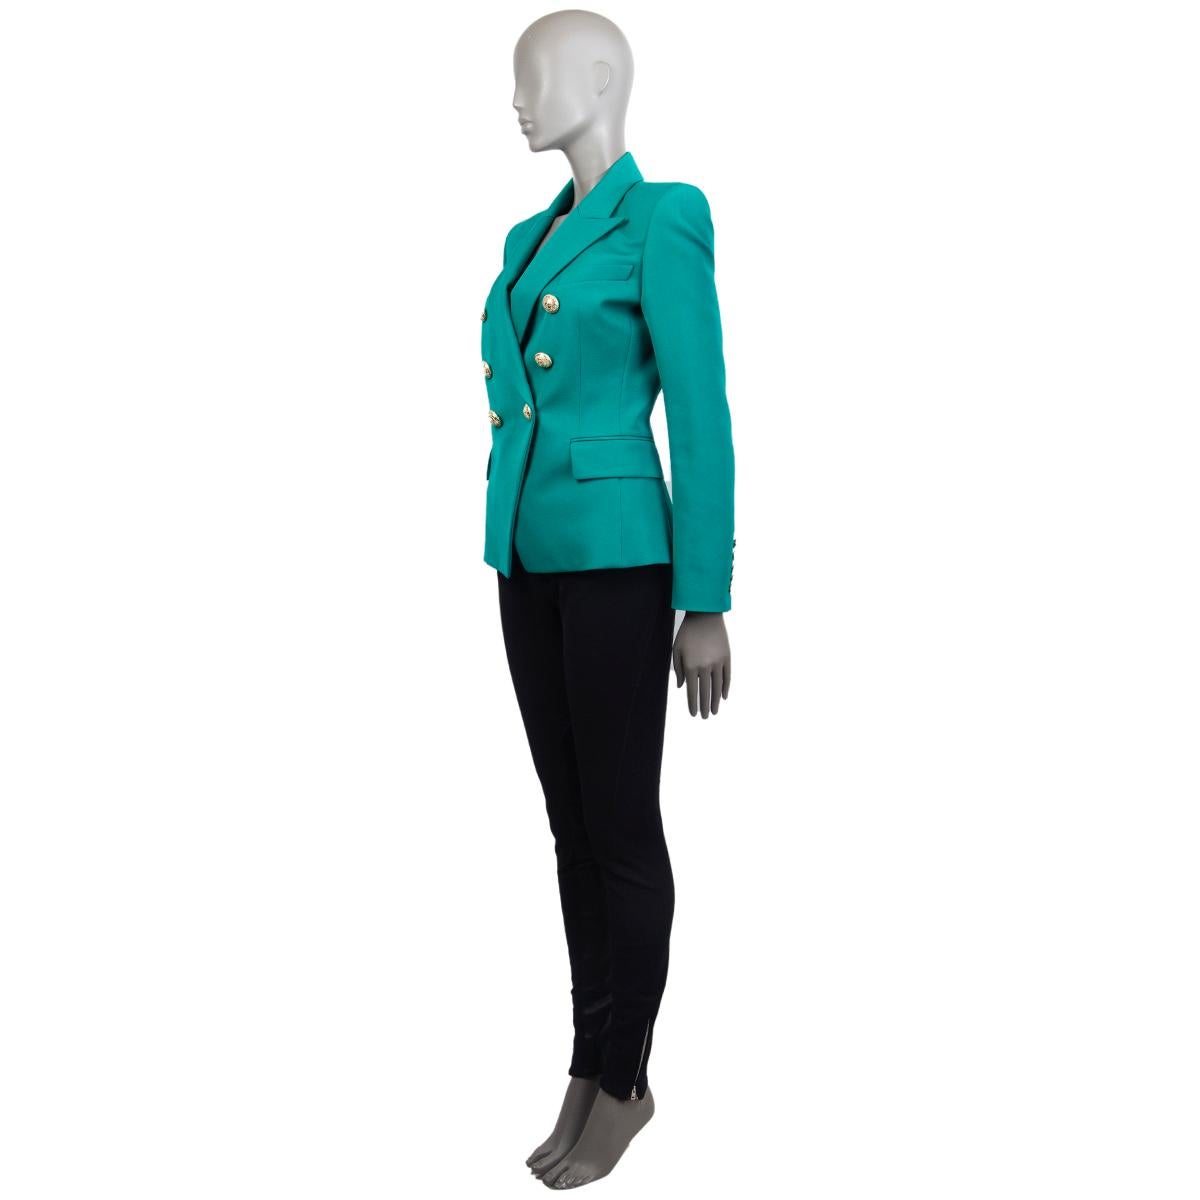 Balmain signature double-breasted blazer in sea wool (100%) with a slim-fitting silhouette, one patch pocket on the chest, two flap pockets and buttoned cuffs at the back. Closes with embosses logo gold-tone buttons in the front. Lined in malachite